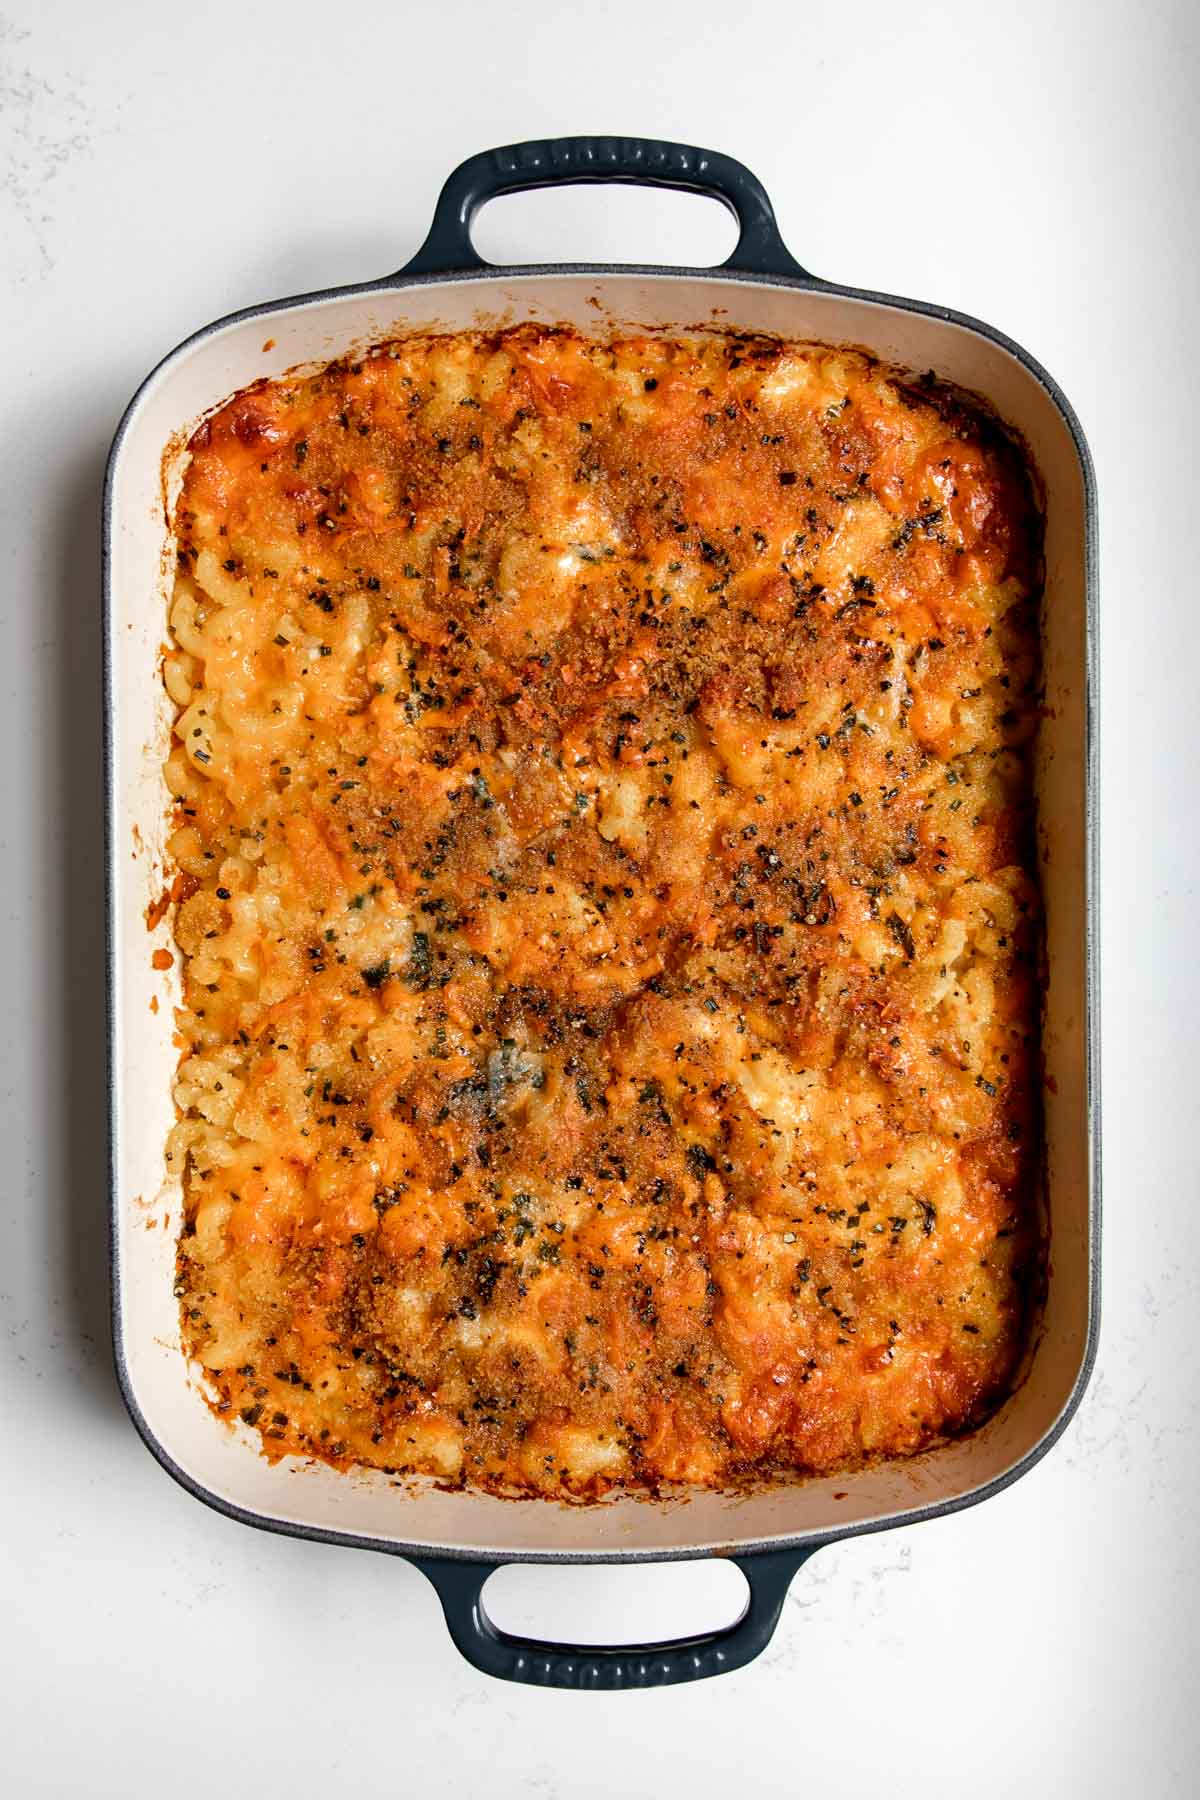 old fashioned baked macaroni and cheese in a cast-iron pan.